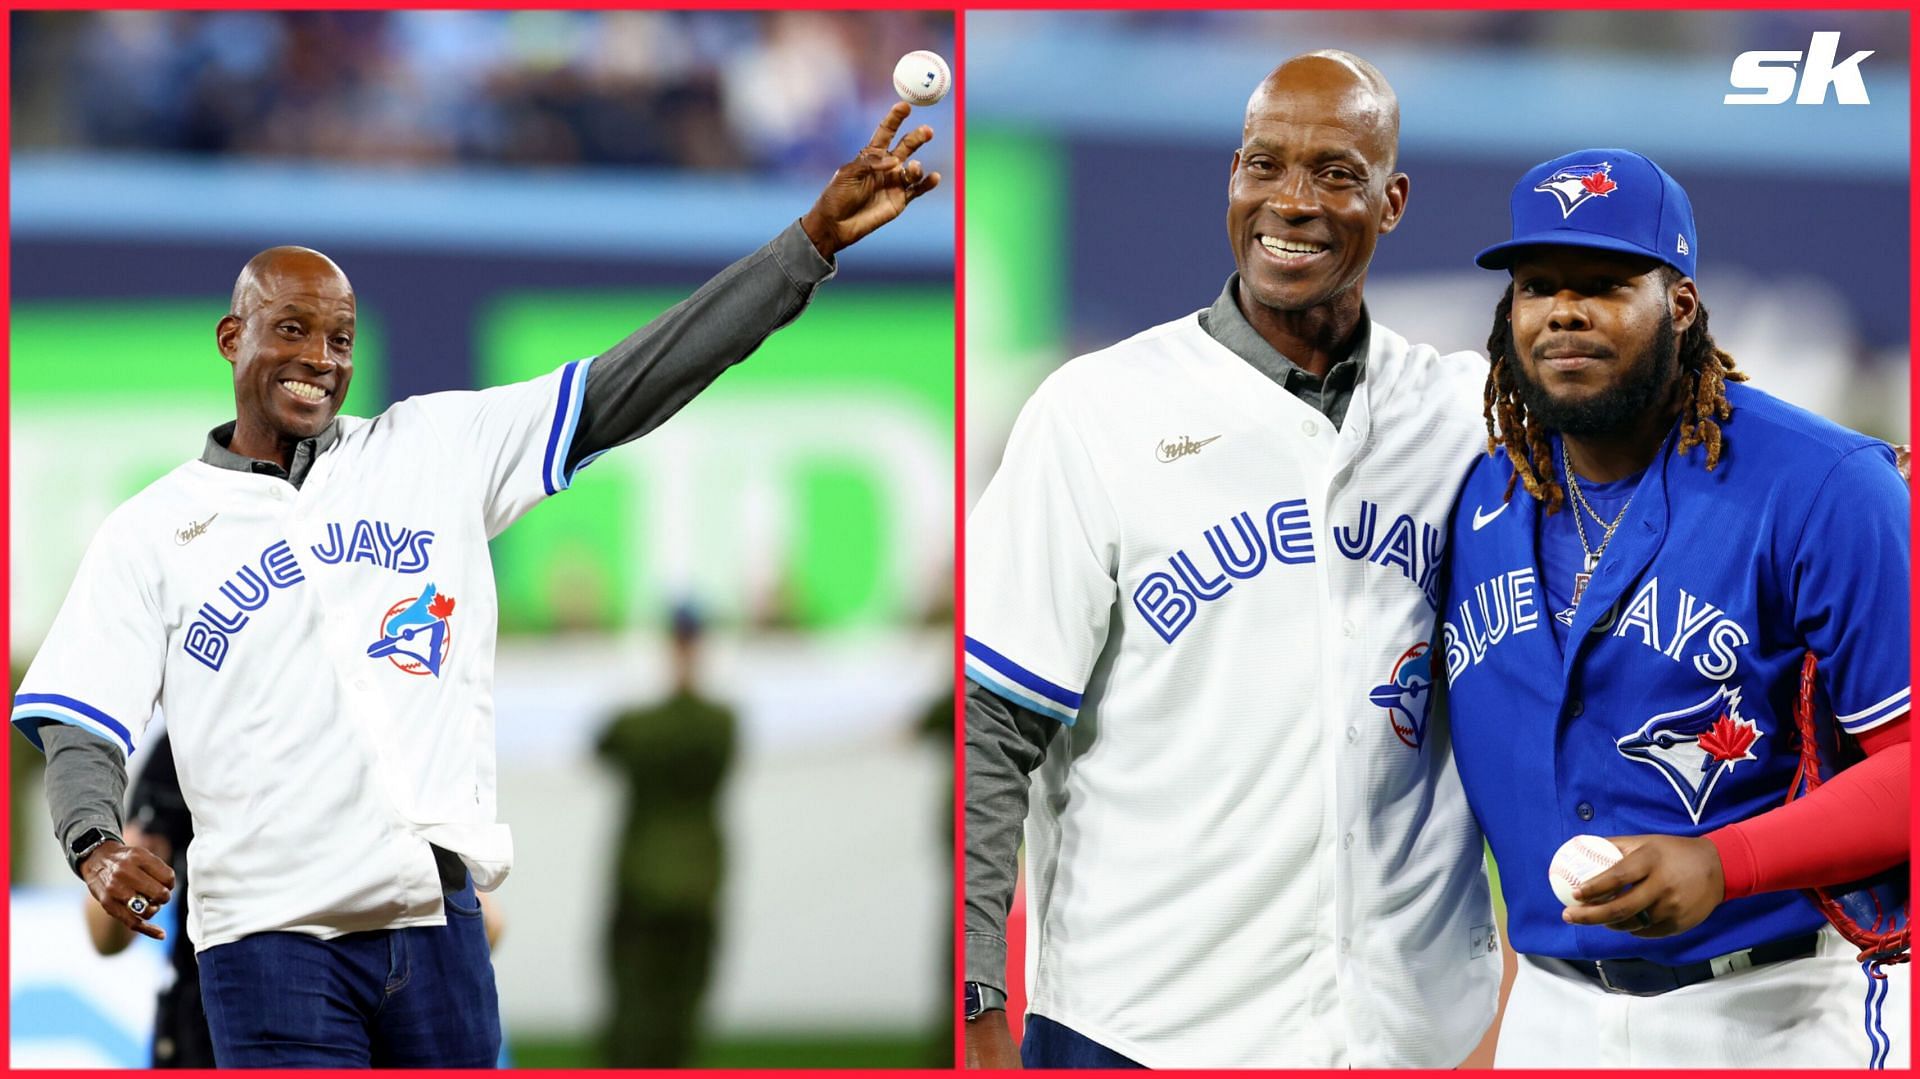 Fred McGriff's Hall of Fame career began with Blue Jays